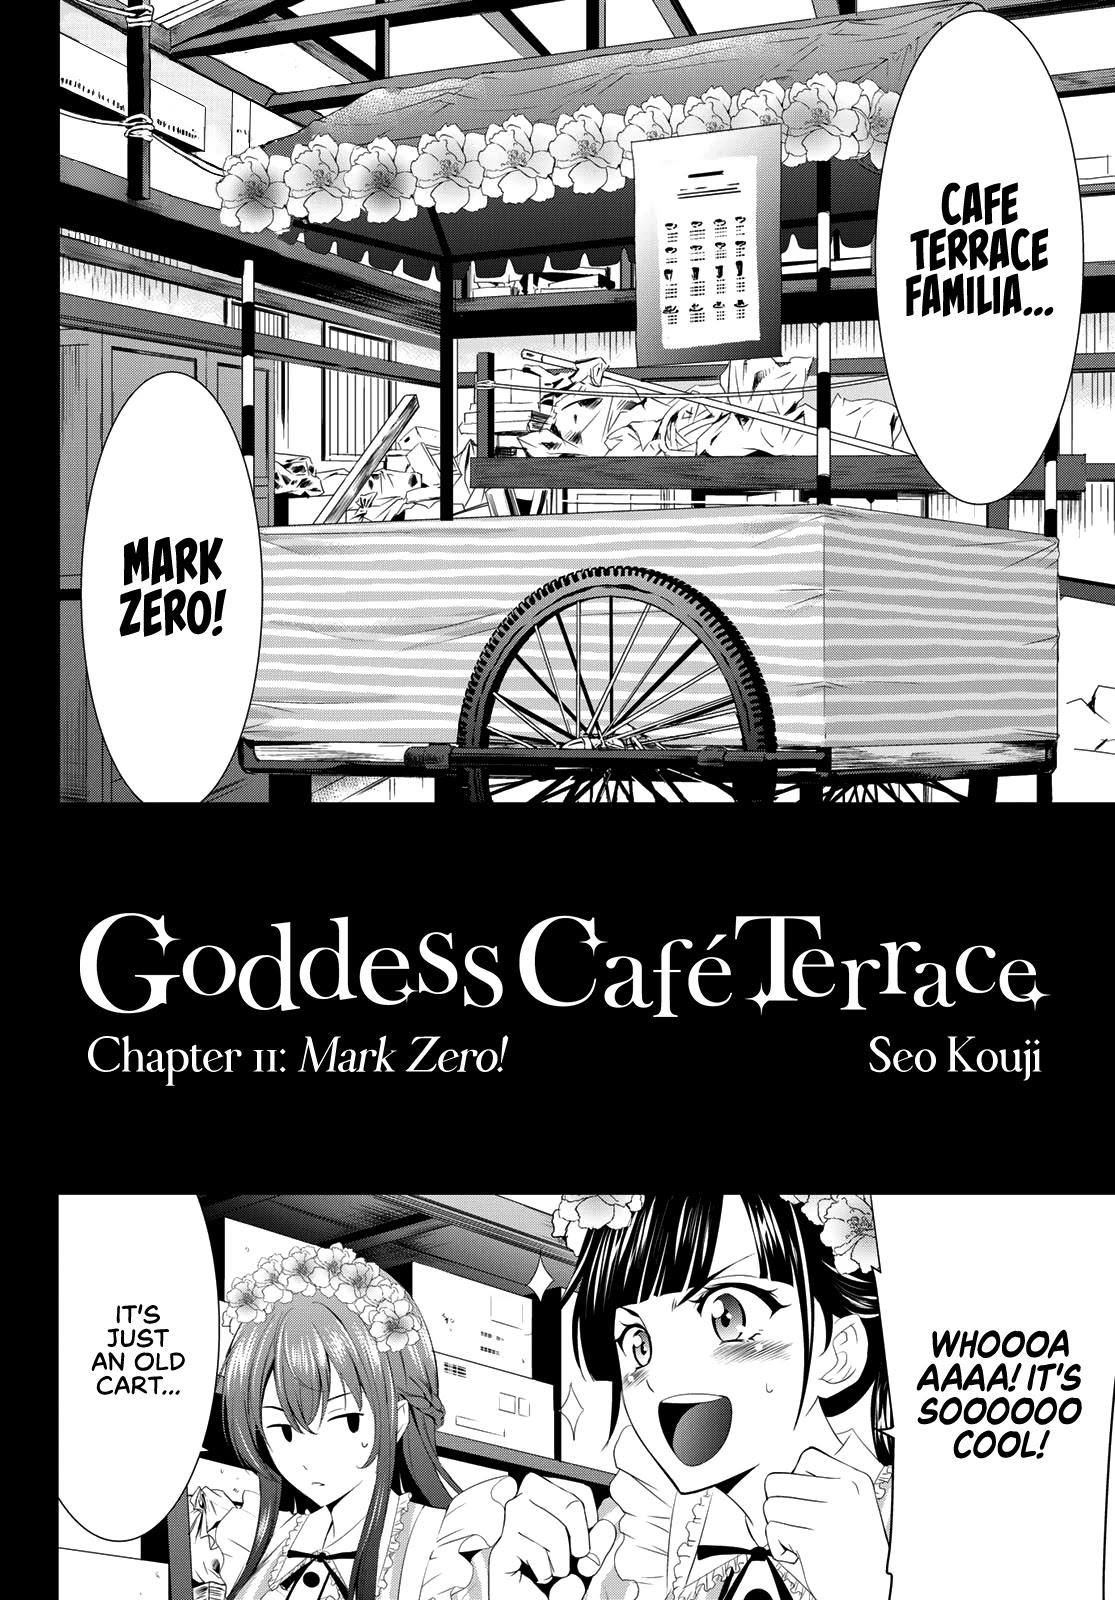 The Café Terrace and Its Goddesses Riho and Her Past - Watch on